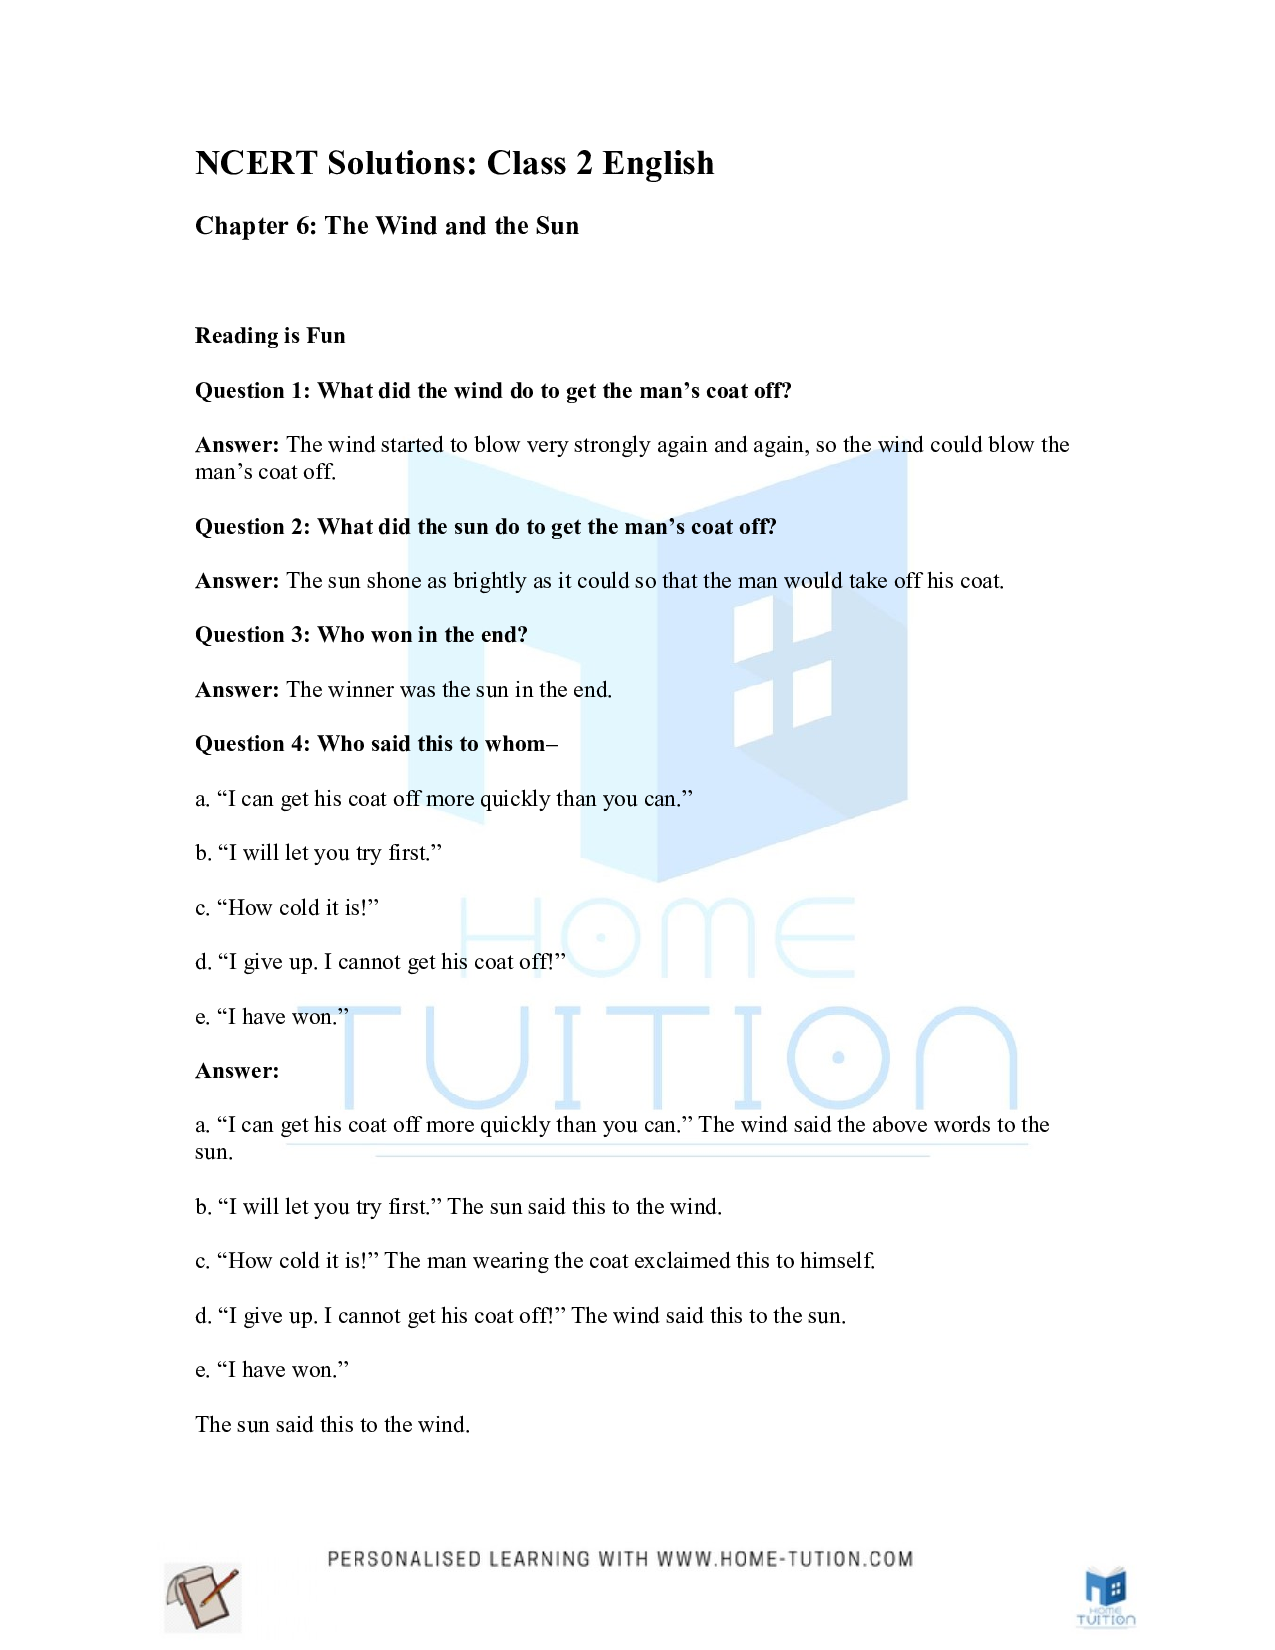 NCERT Solutions for Class 2 English The Wind and the Sun